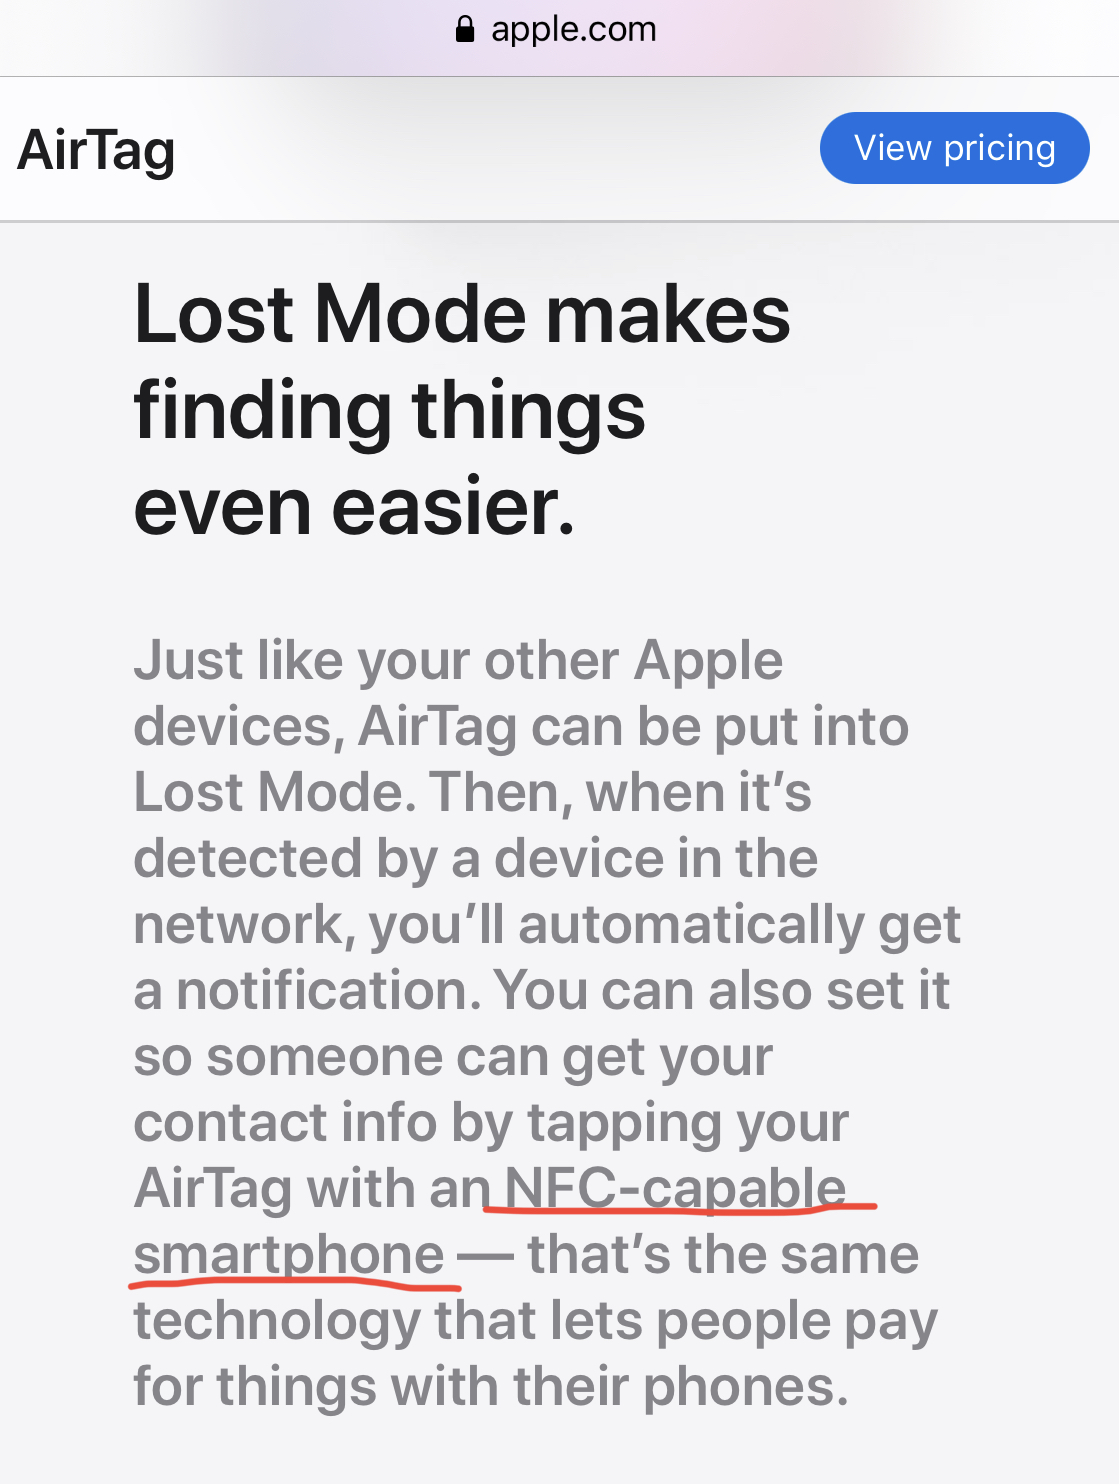 Android users can read an AirTag's 'Lost Mode' message via NFC